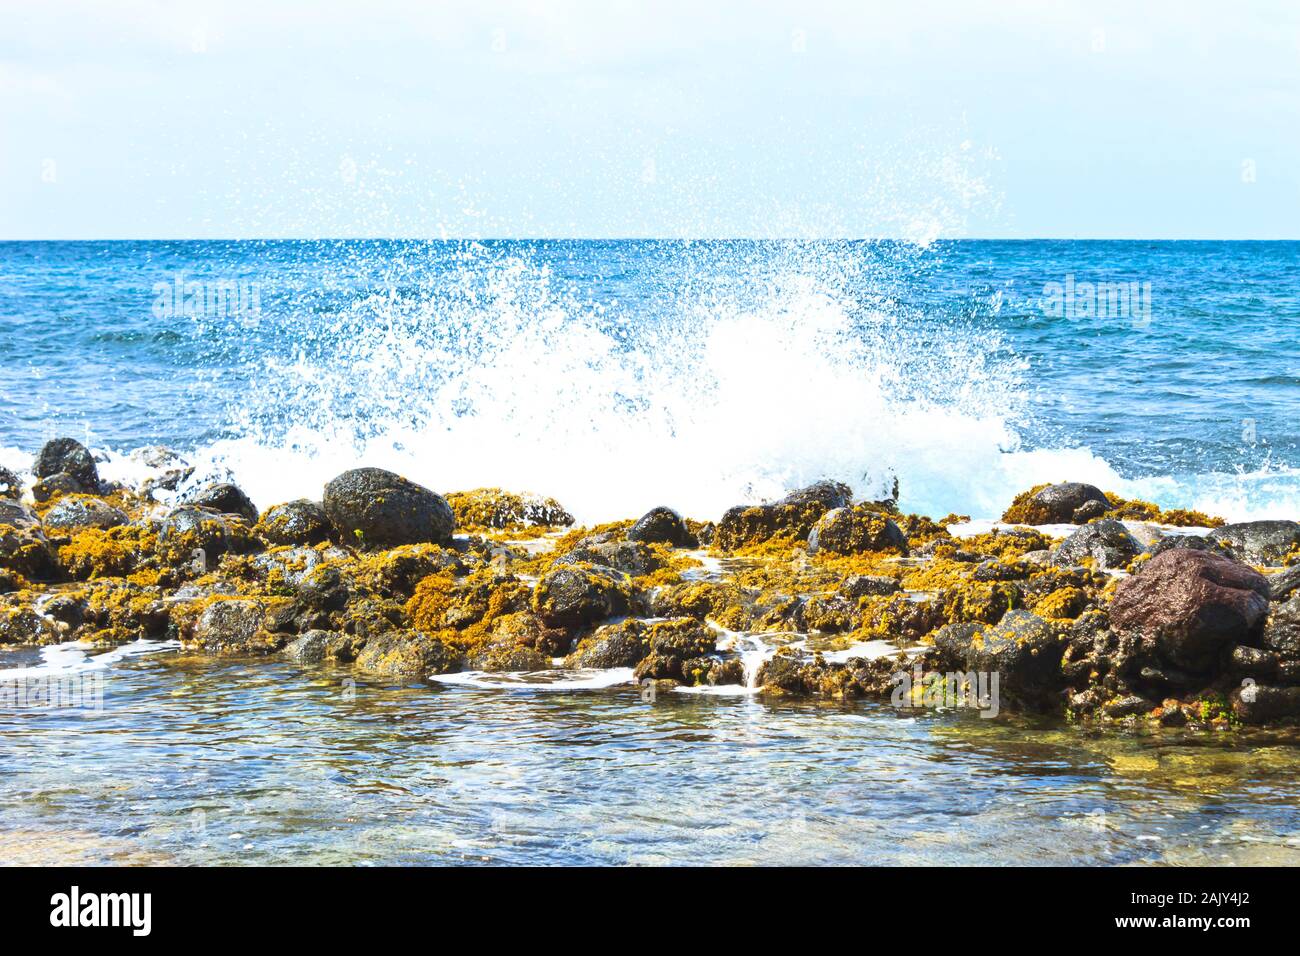 Wave splash on rock barrier covered with weathered sea weed Stock Photo